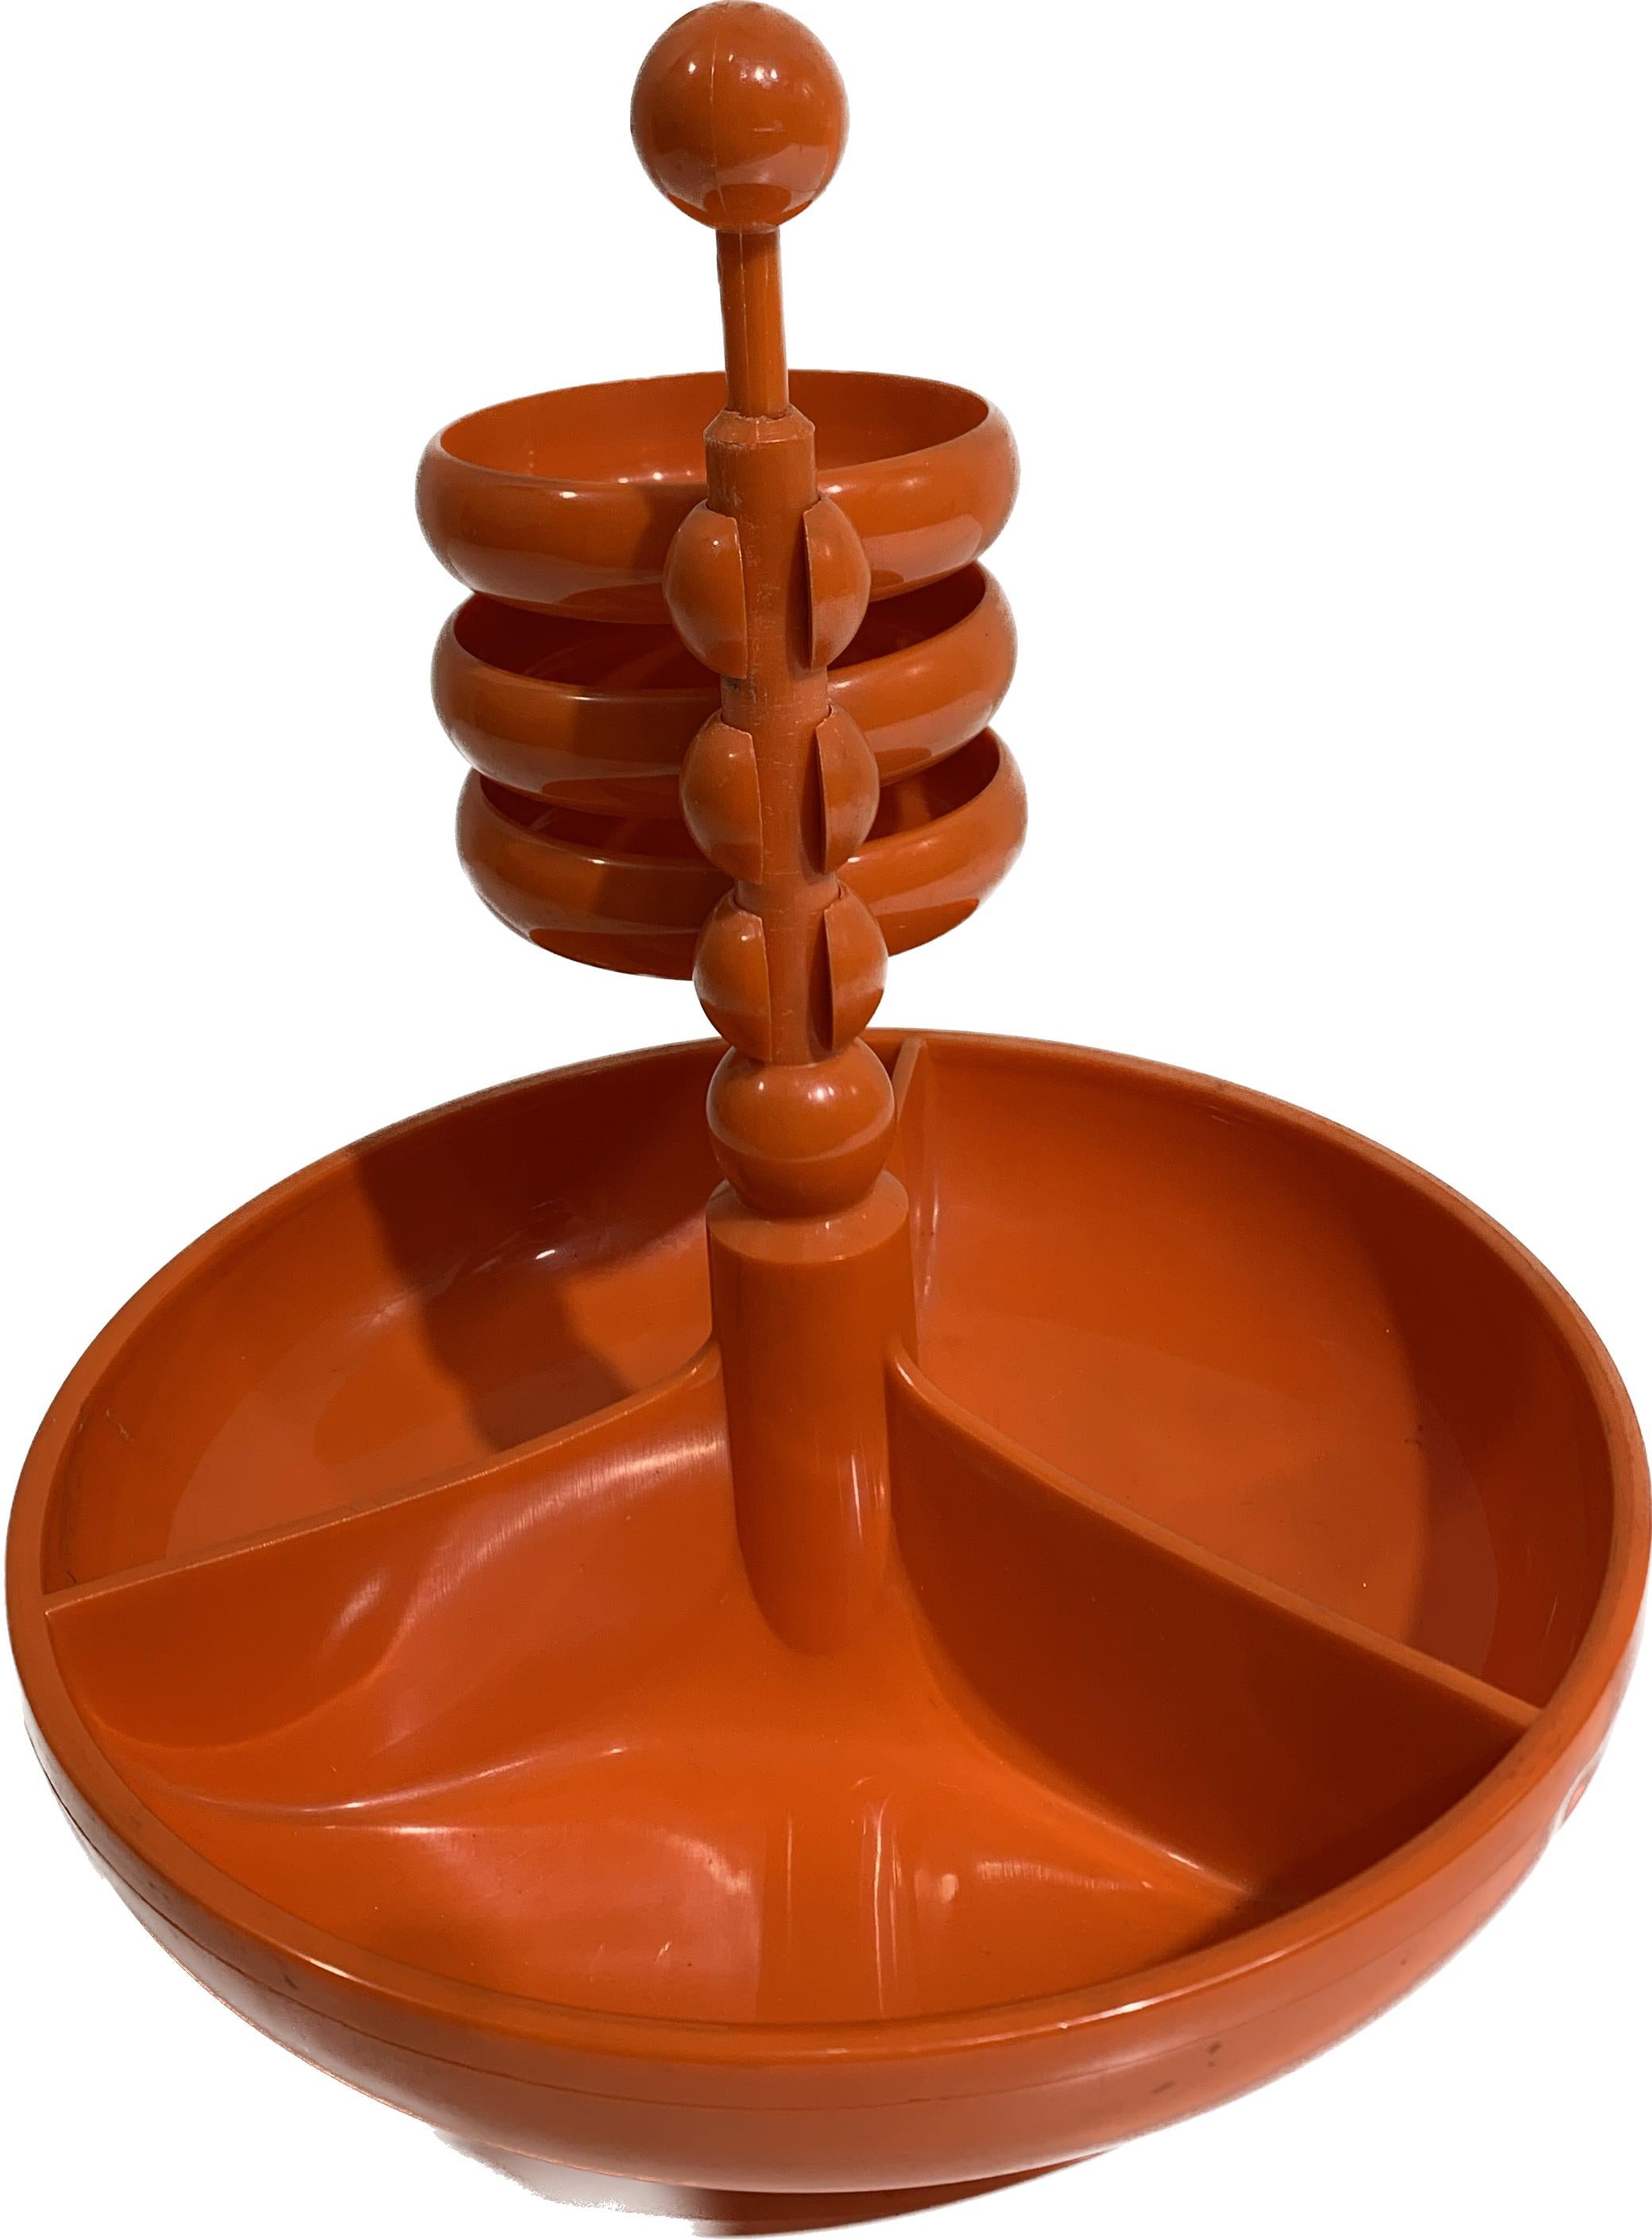 Vintage 1970s Orange Snack Tower in Abs by EMSA For Sale 4